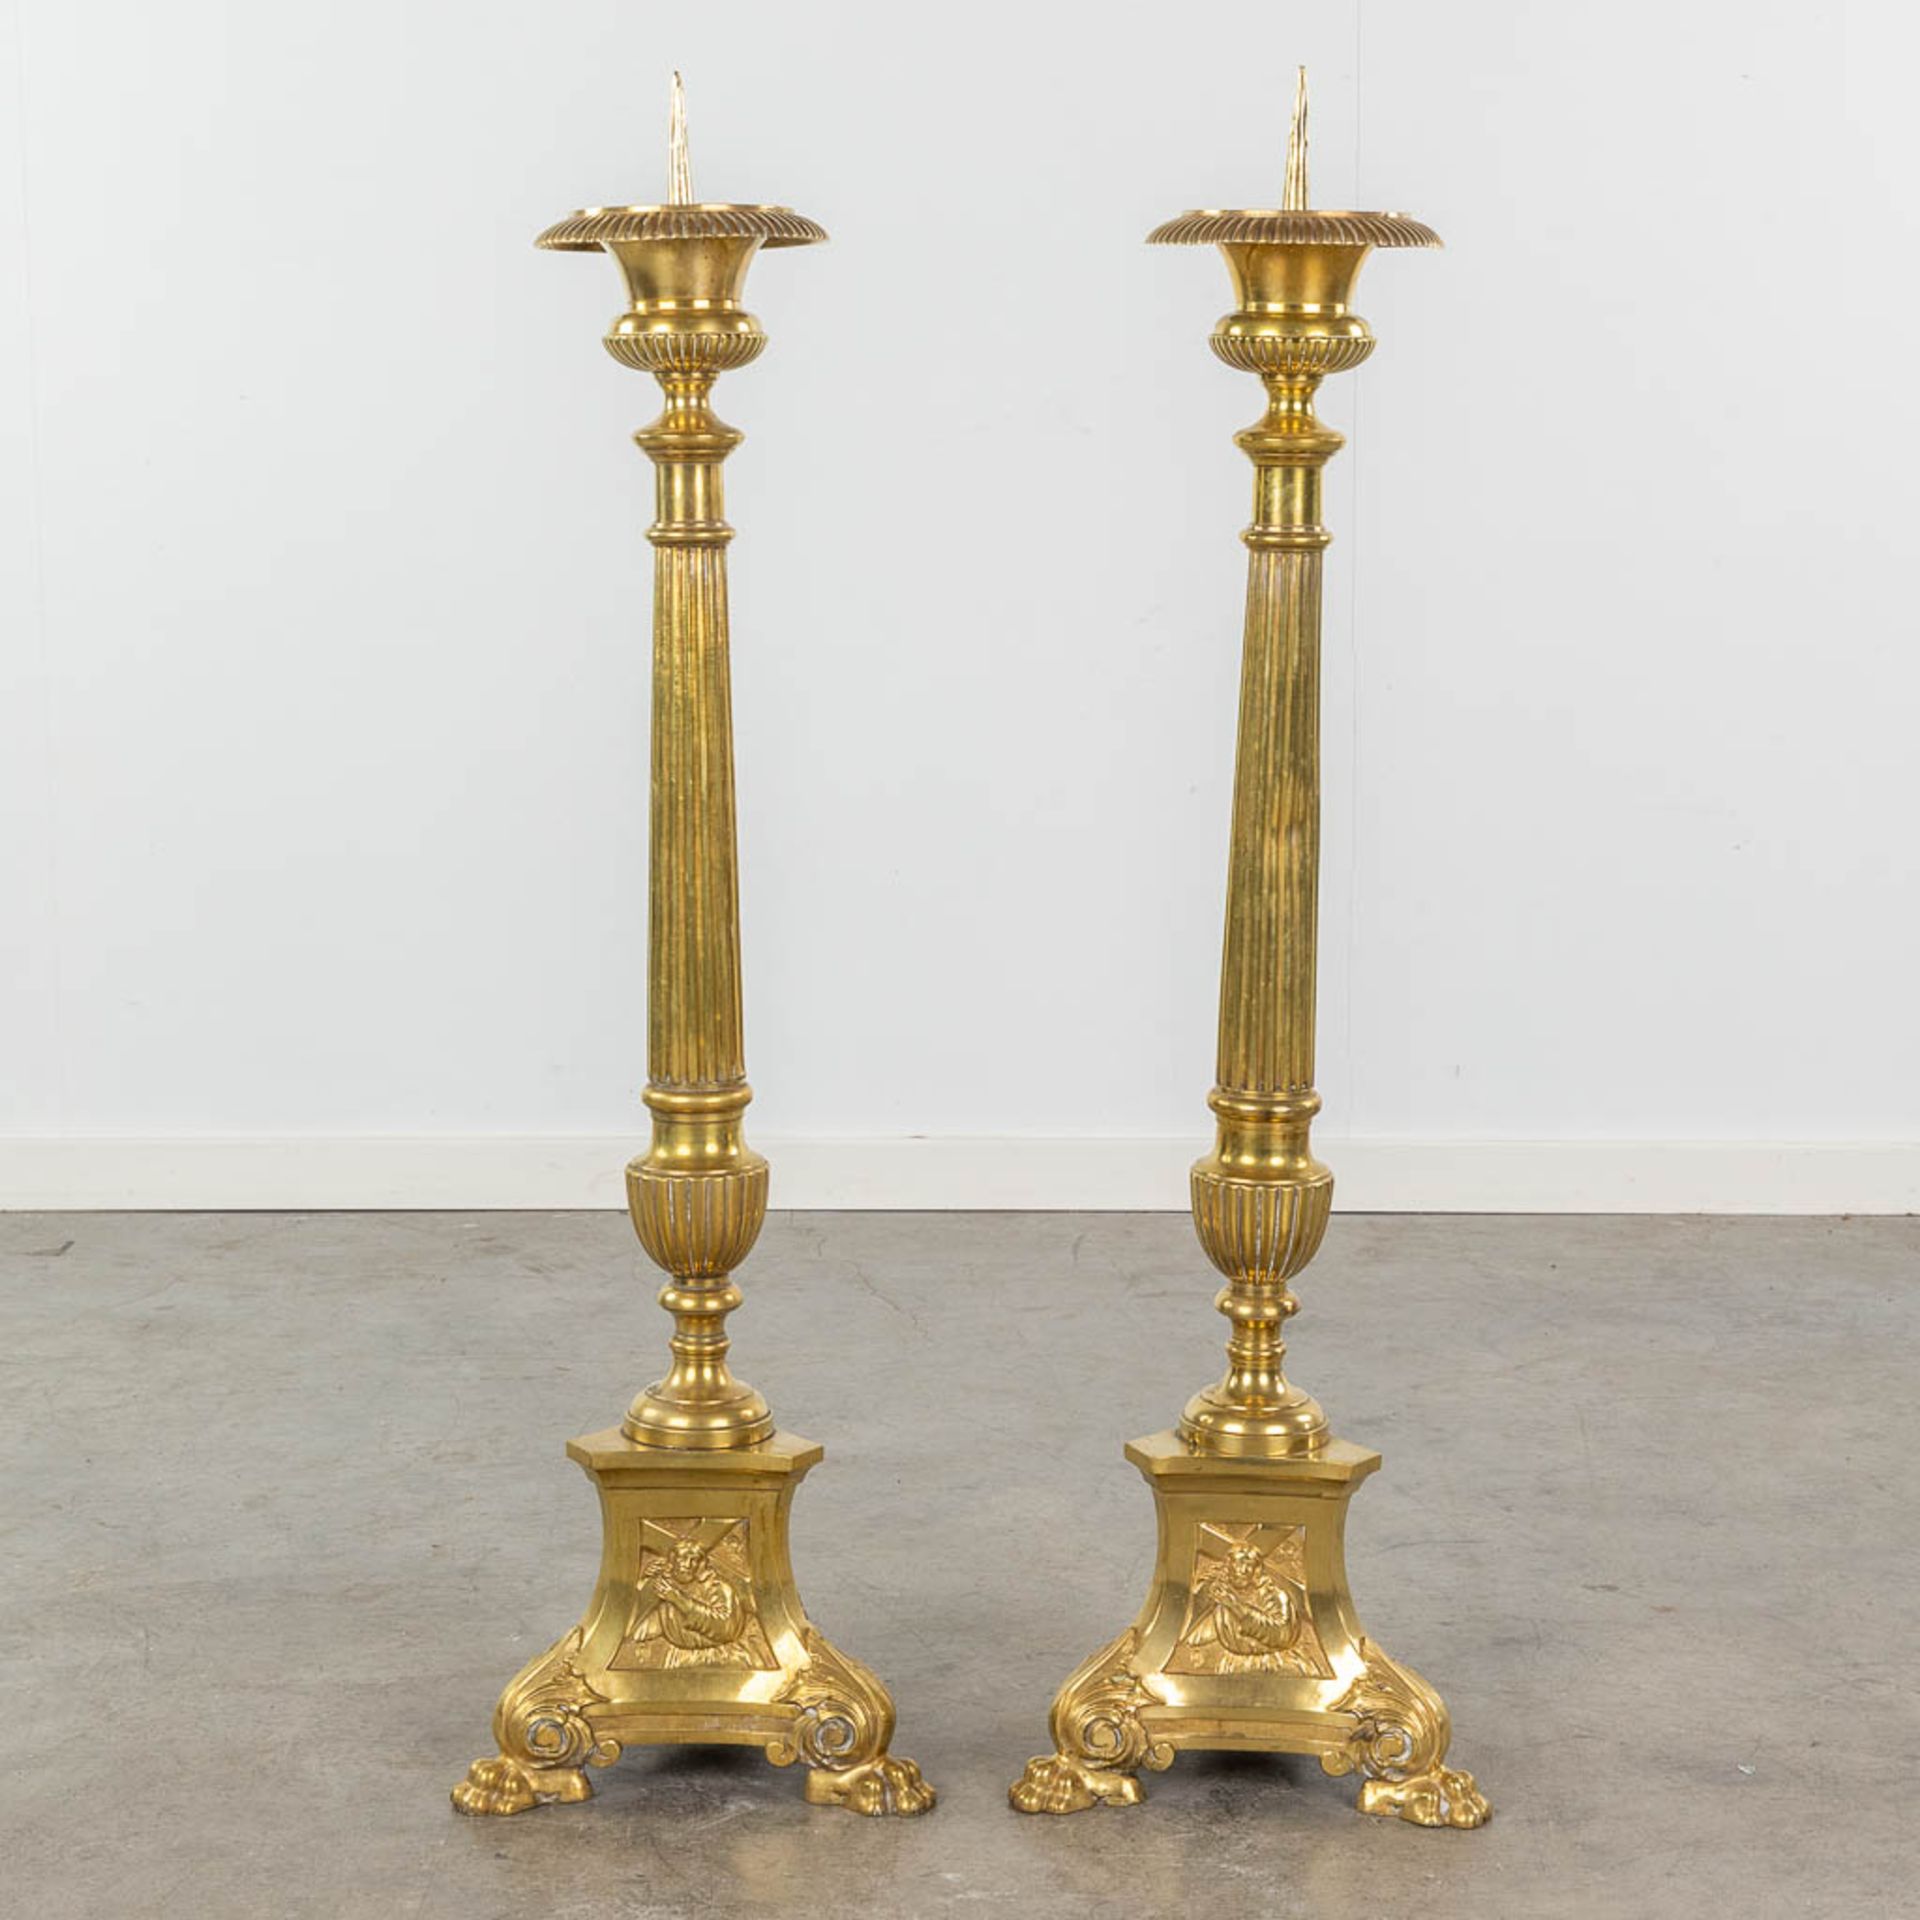 A pair of gold-plated and bronze church candle holders. Images of Joseph, Jesus and Mary. 19th C. (H